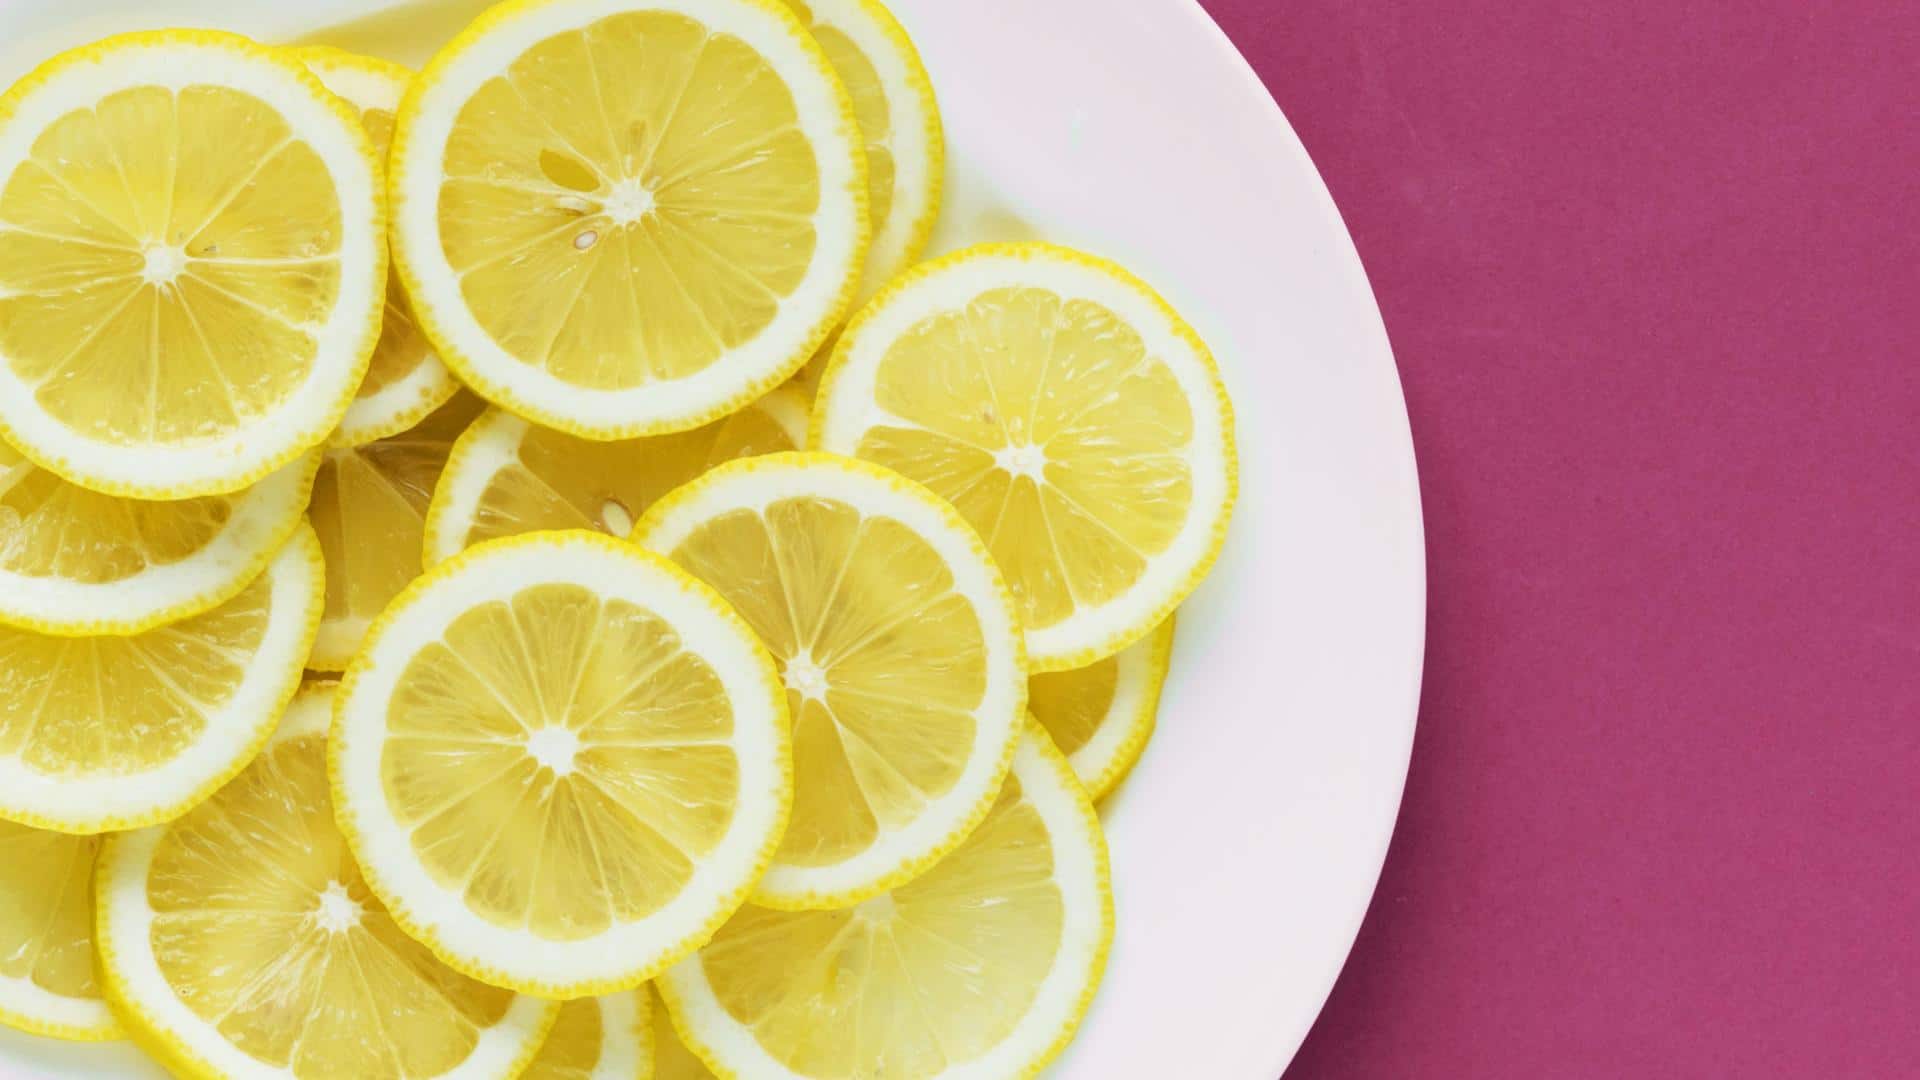 Lemon Month: Make June citrusy with these recipes